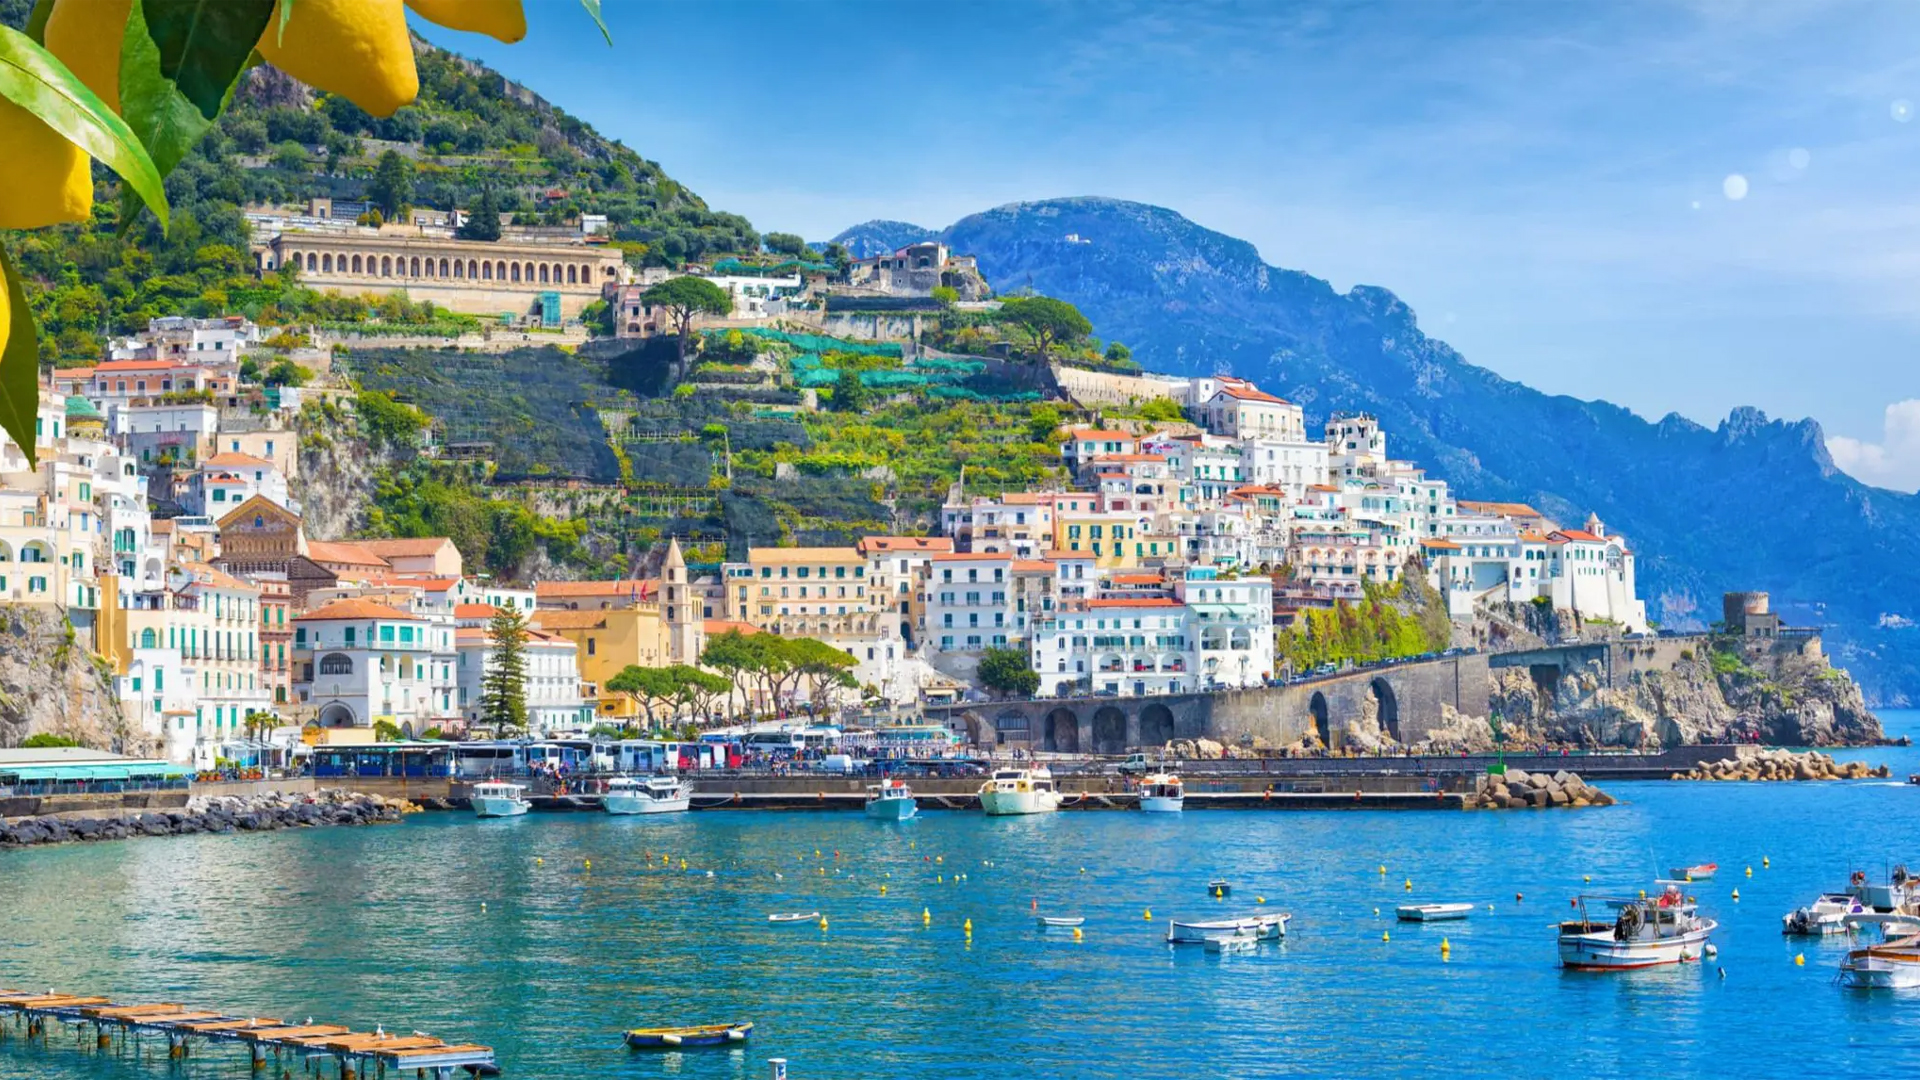 3 New Towns to Check Out on the Amalfi Coast